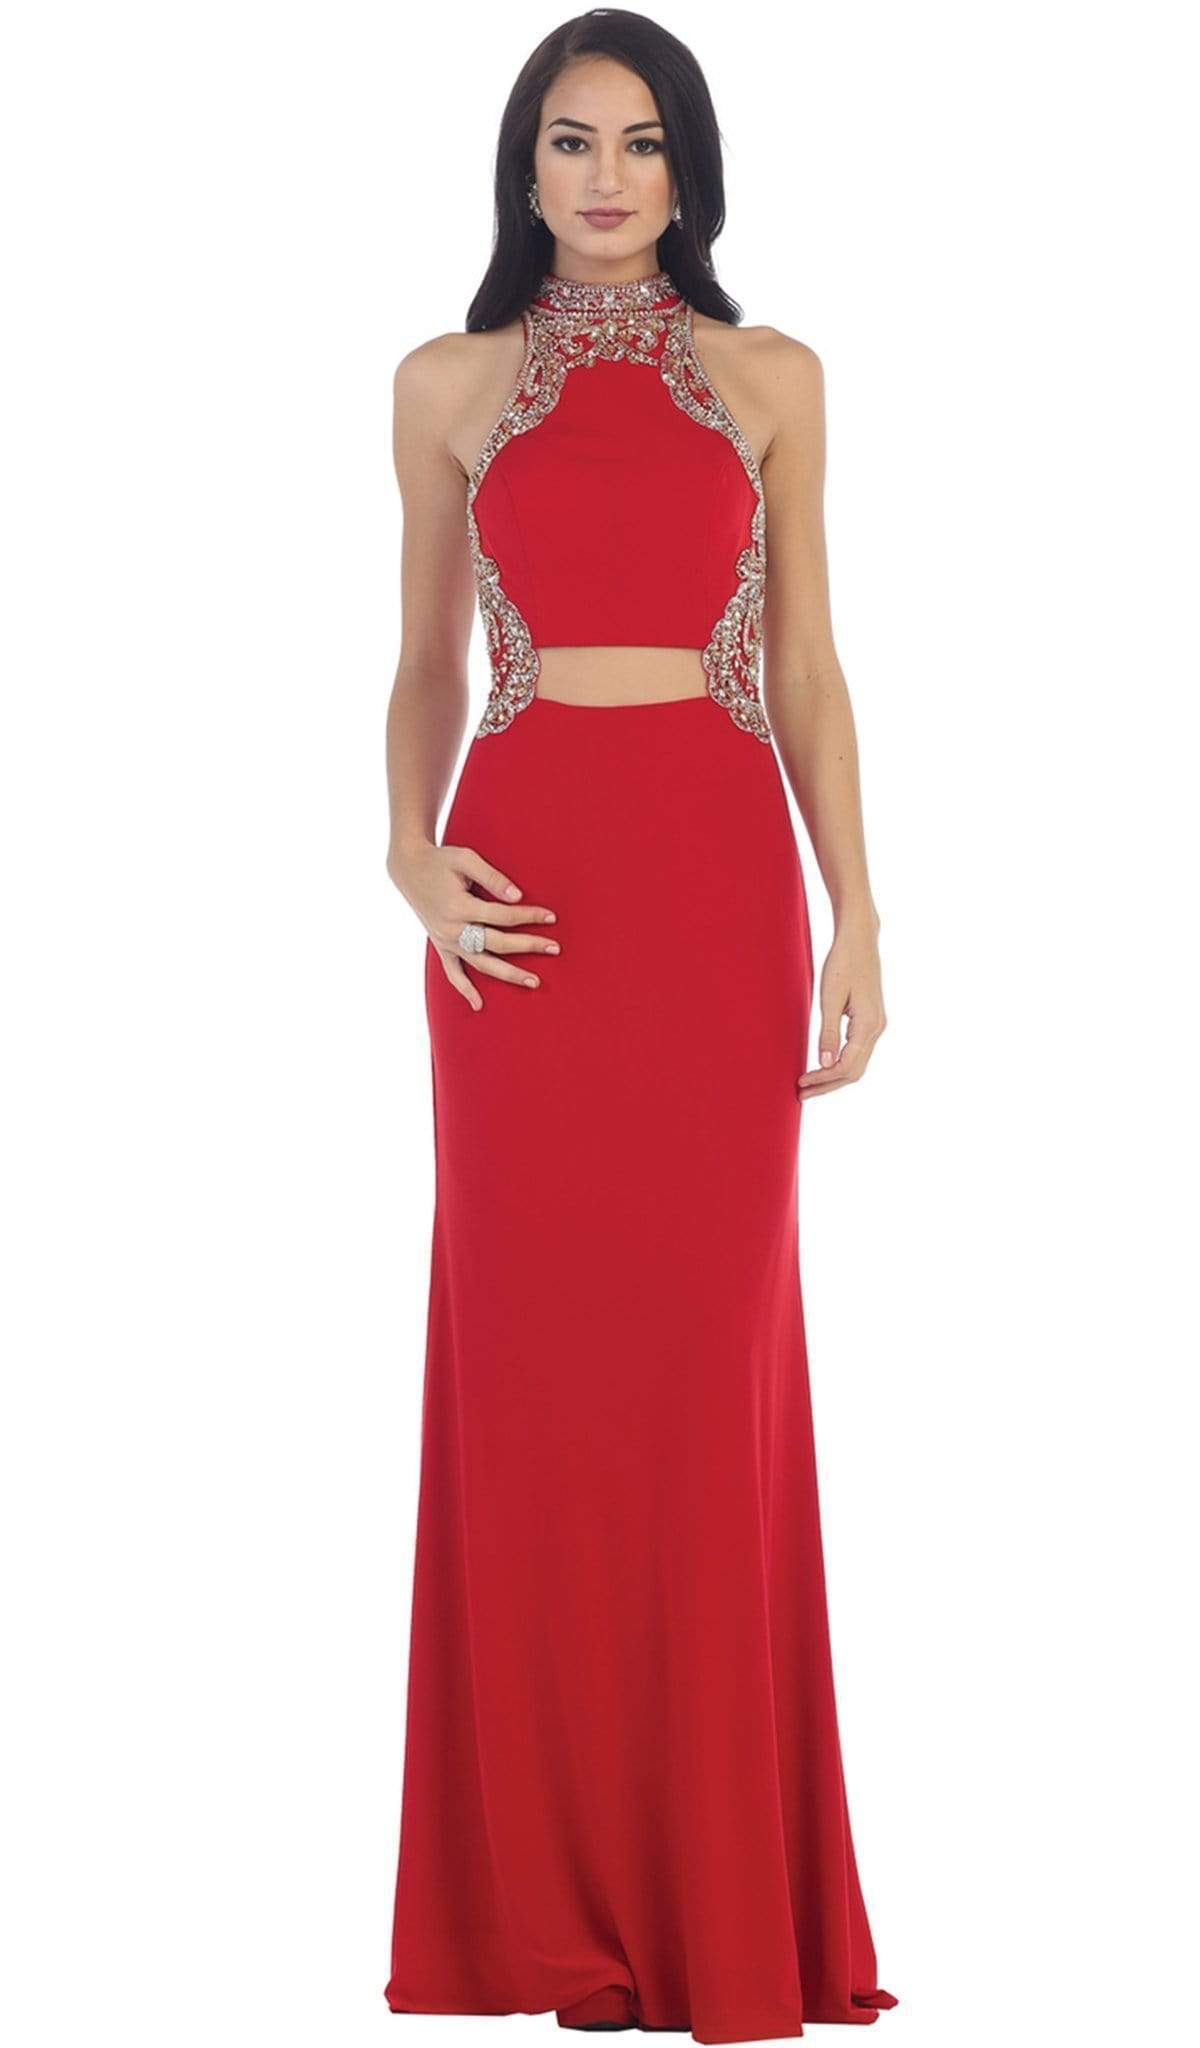 May Queen - RQ7422 Elegant High Neck Long Dress Special Occasion Dress 2 / Red